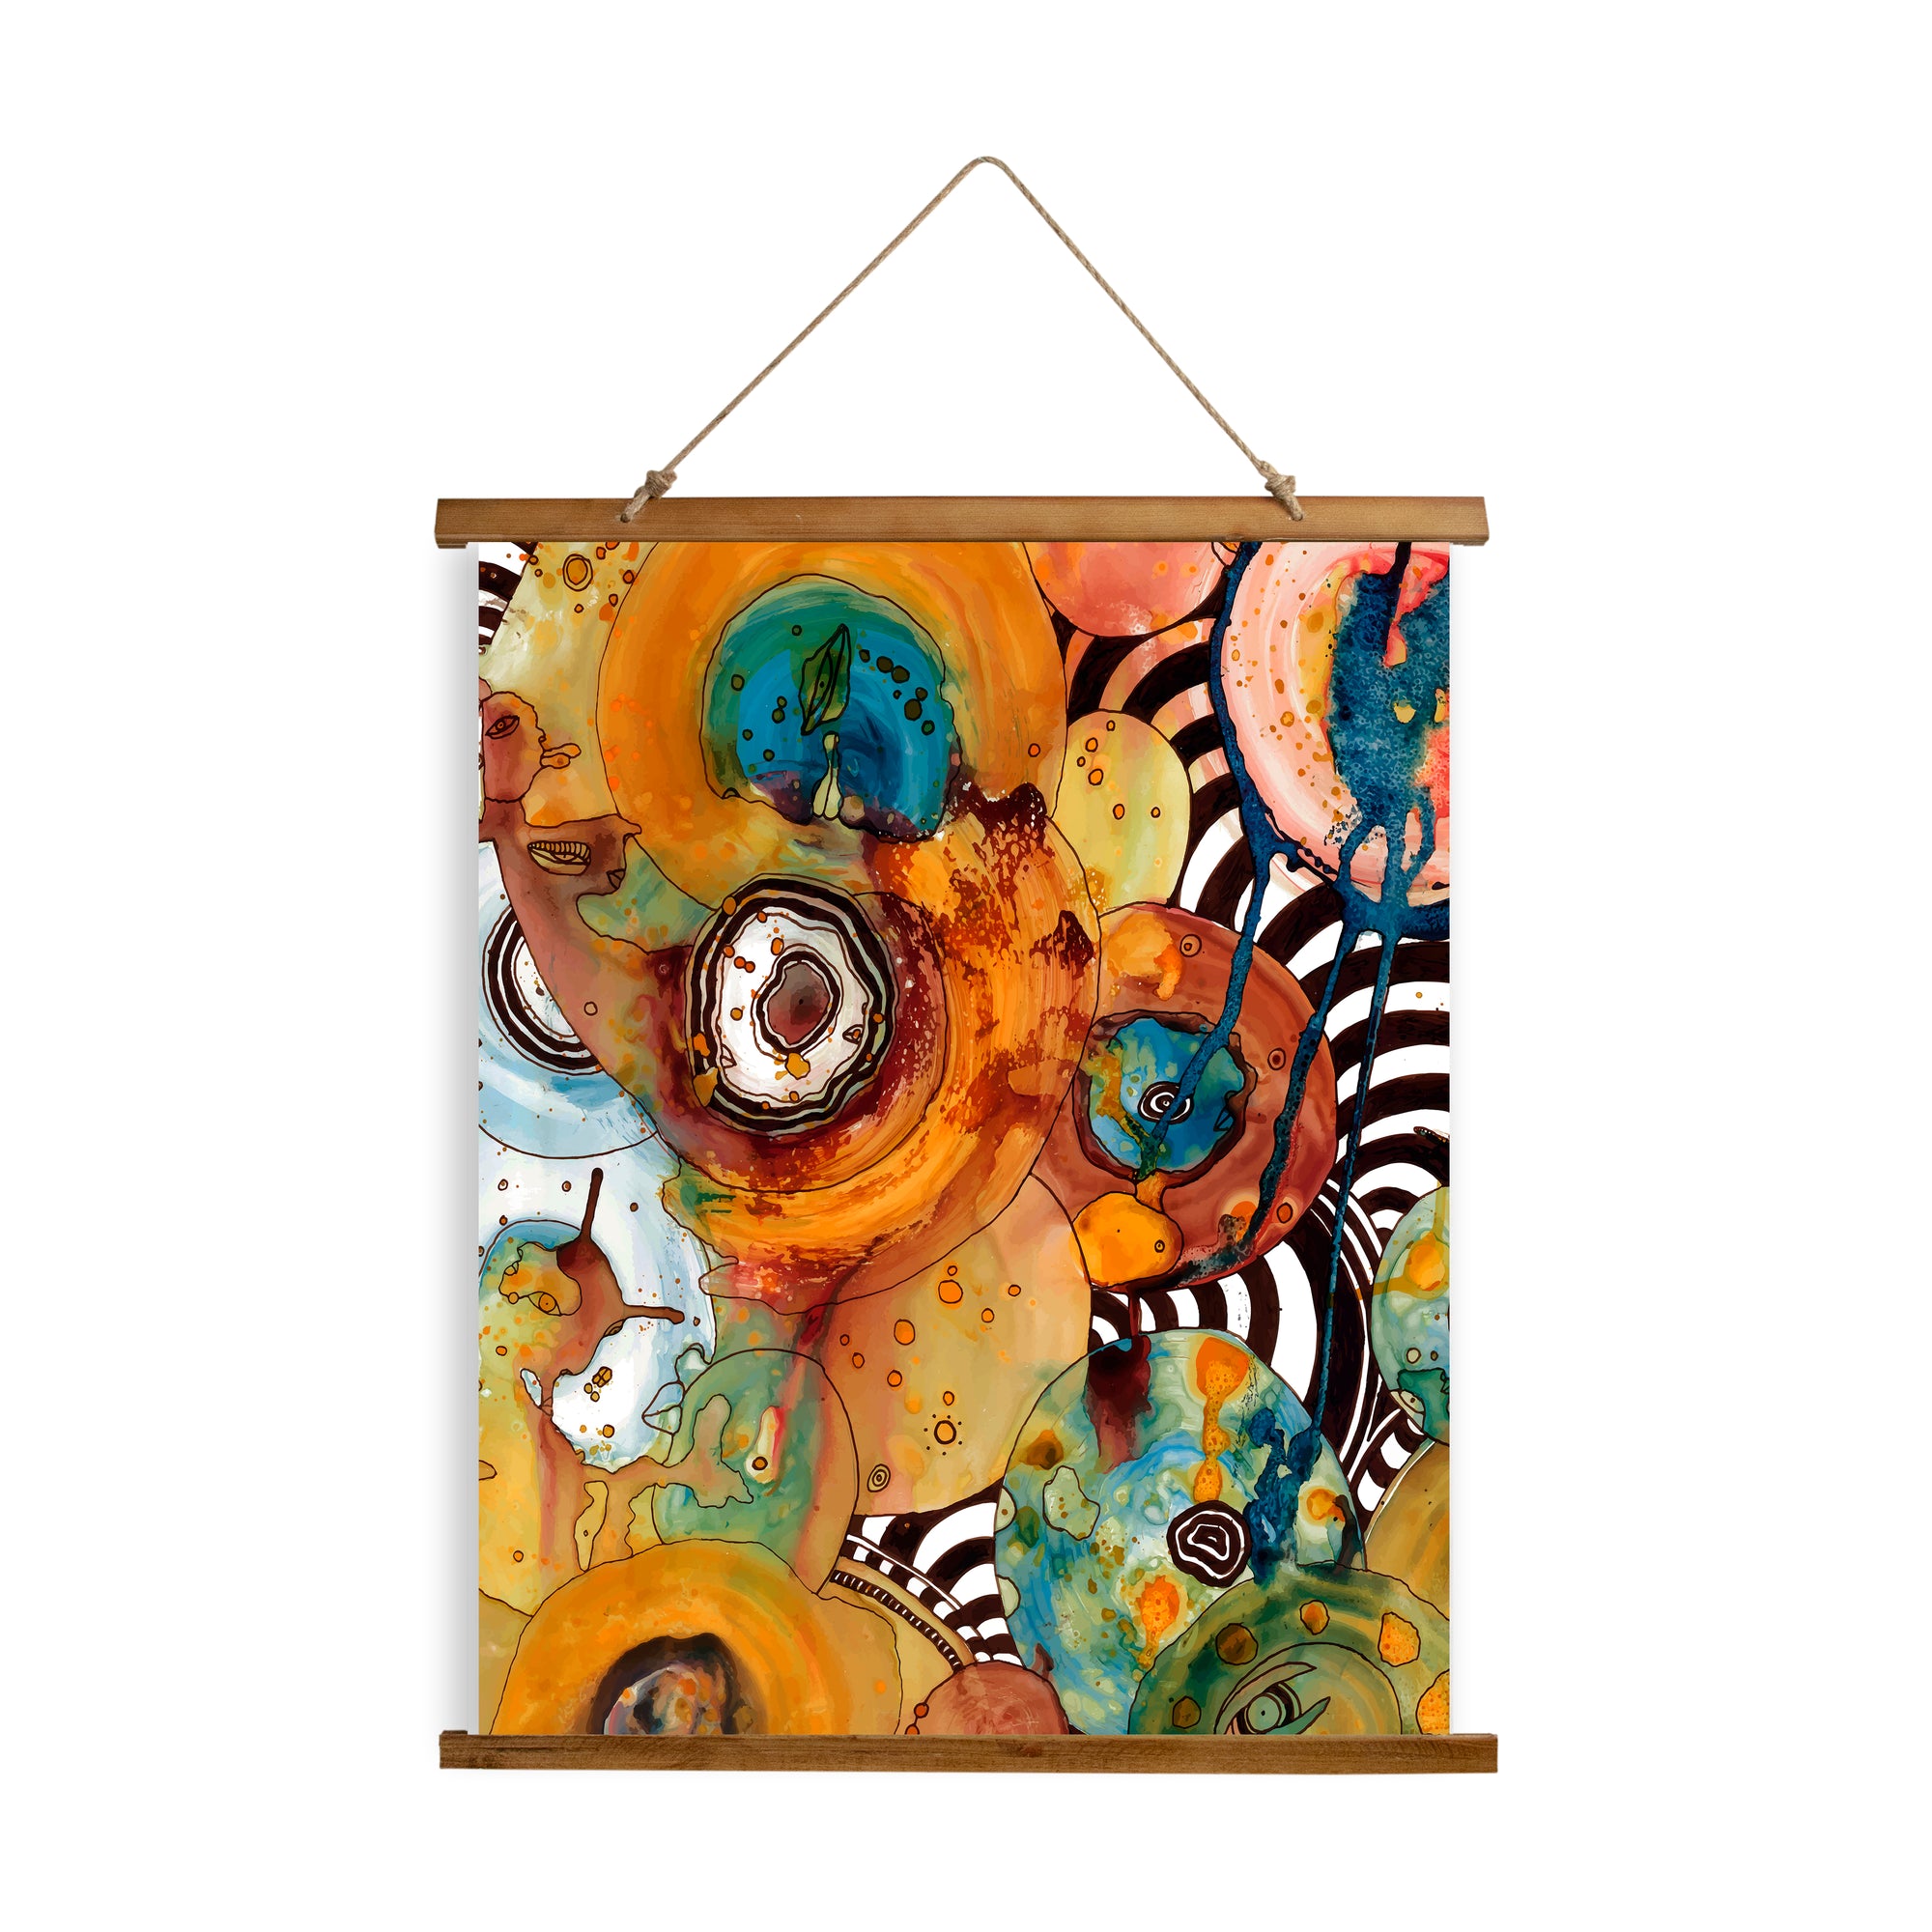 Whimsical Wood Slat Tapestry "Energy Abstract"